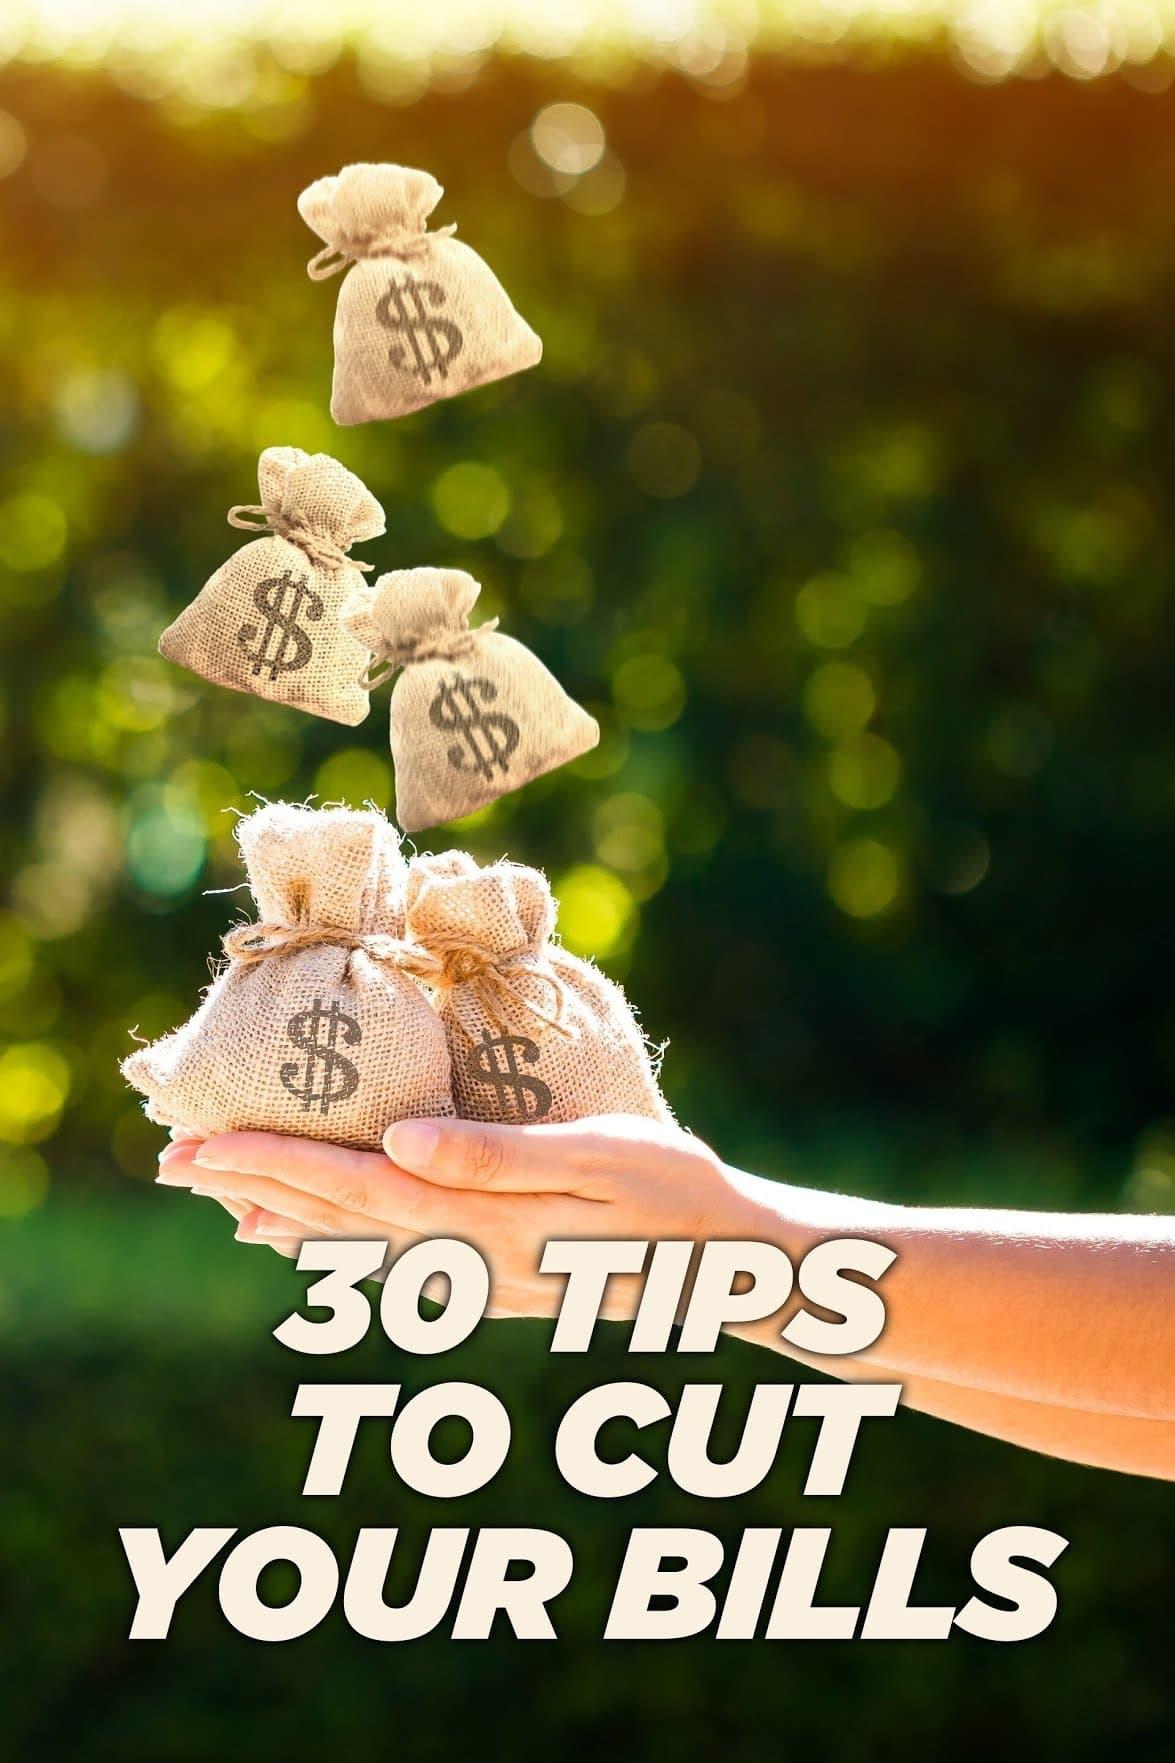 30 Tips to Cut Your Bills poster